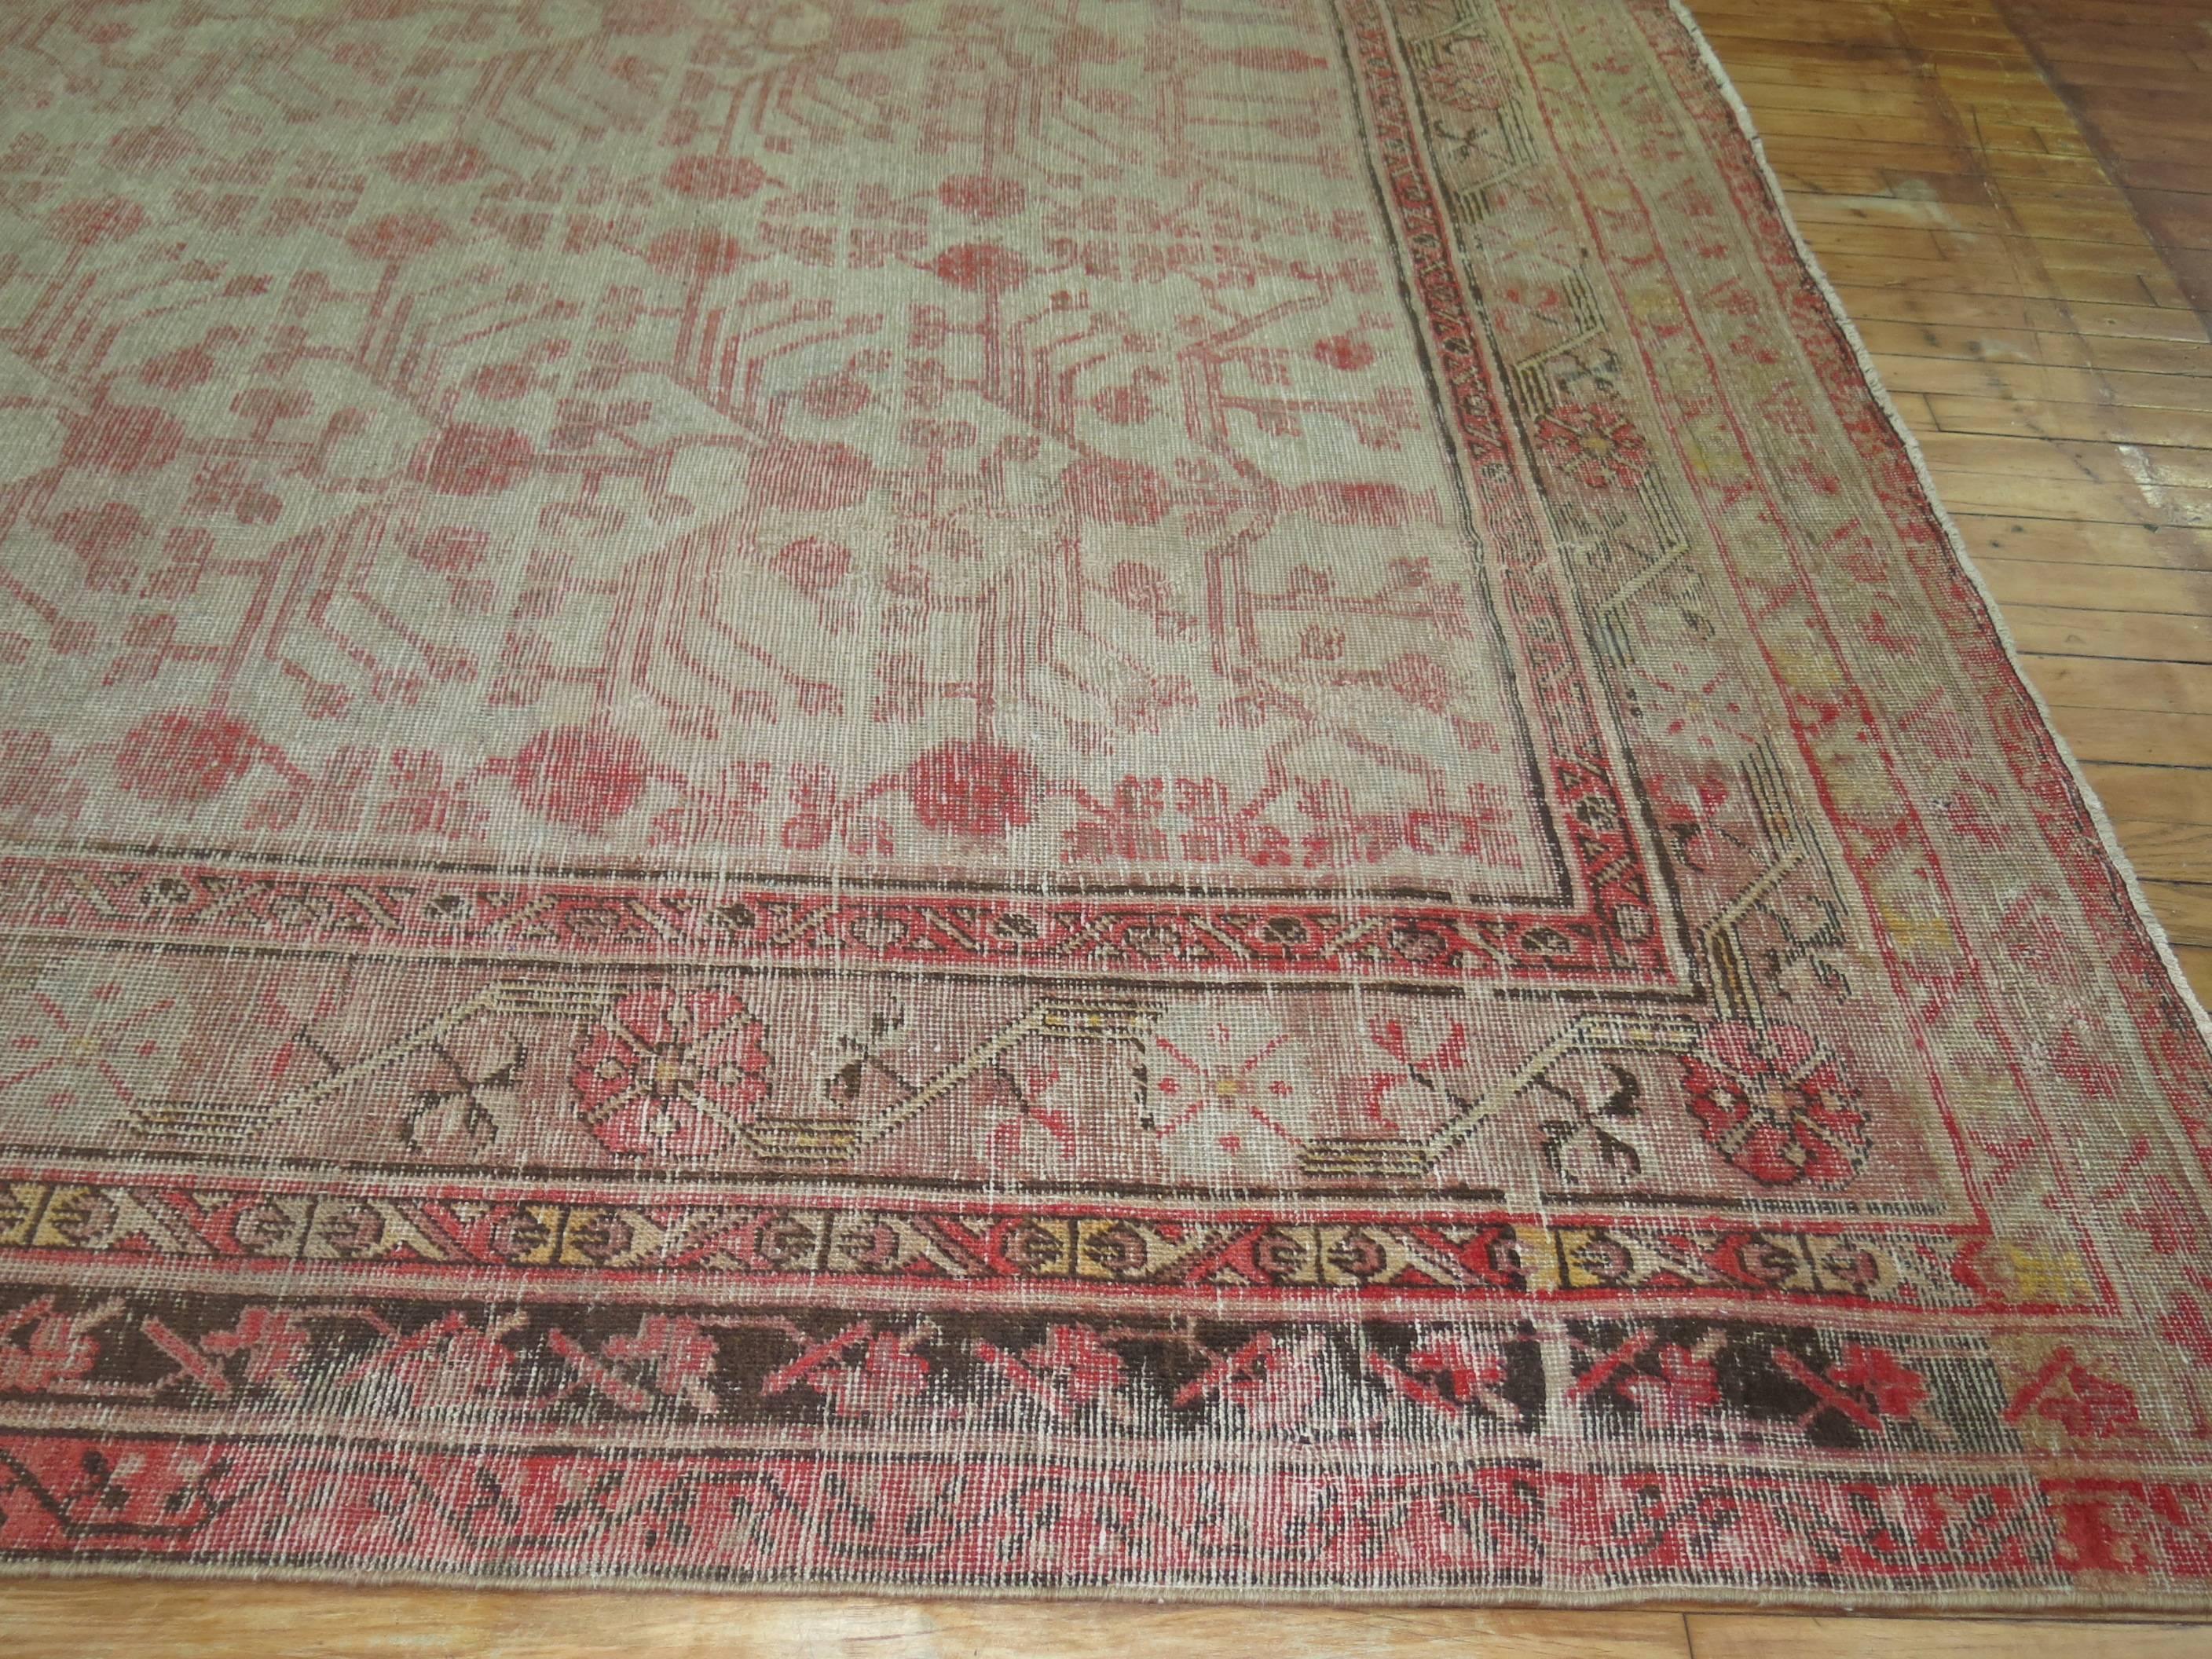 Pomegranate Khotan Shabby Chic Late 19th Century Large Gallery Size Rug For Sale 2